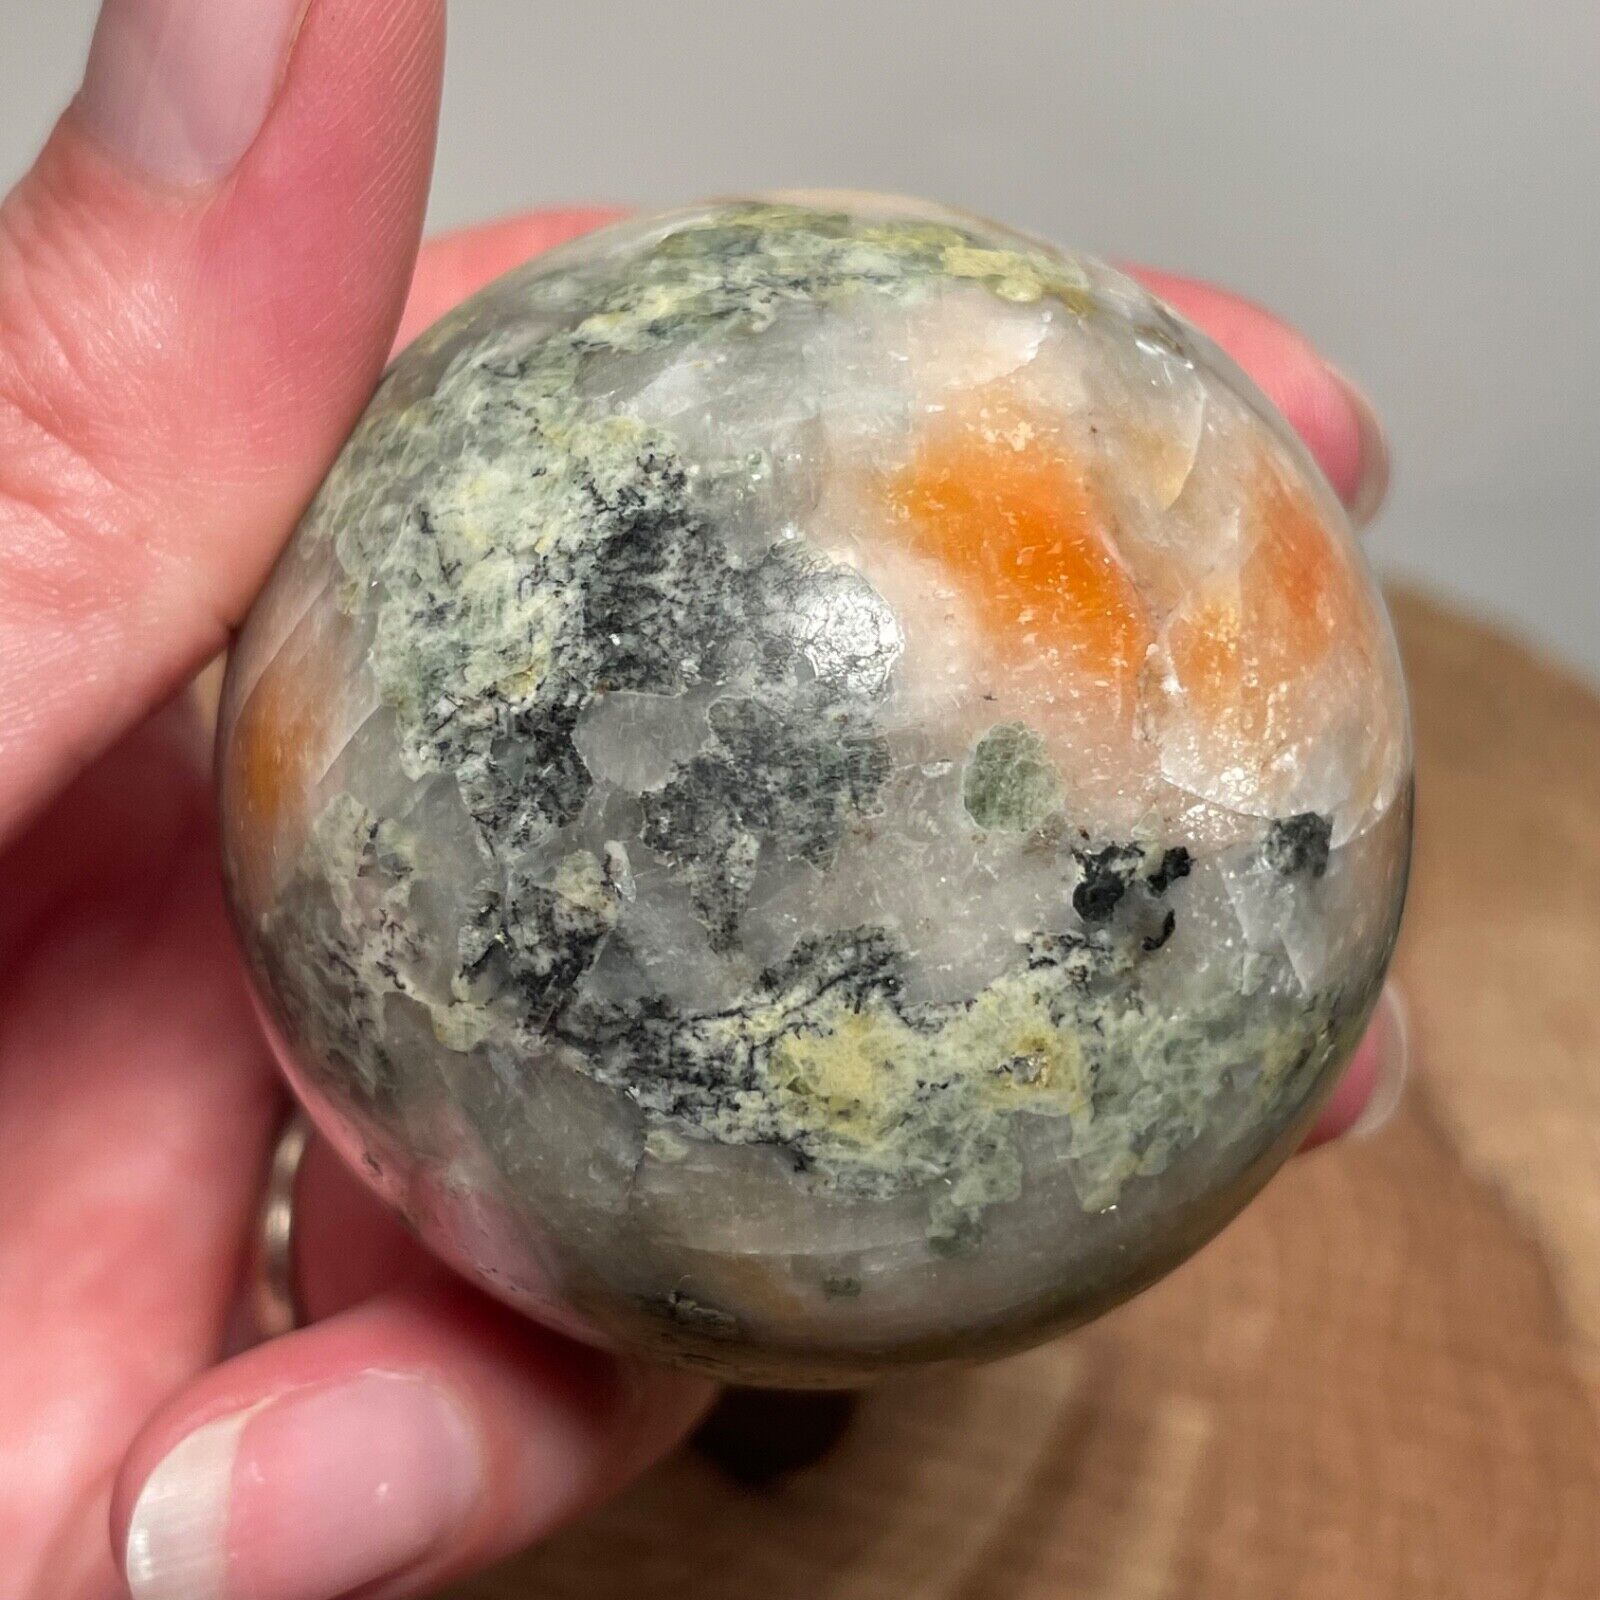 **No Stand** Calcite “Sunstone” Sphere with Mystery Green Mineral 194 Grams